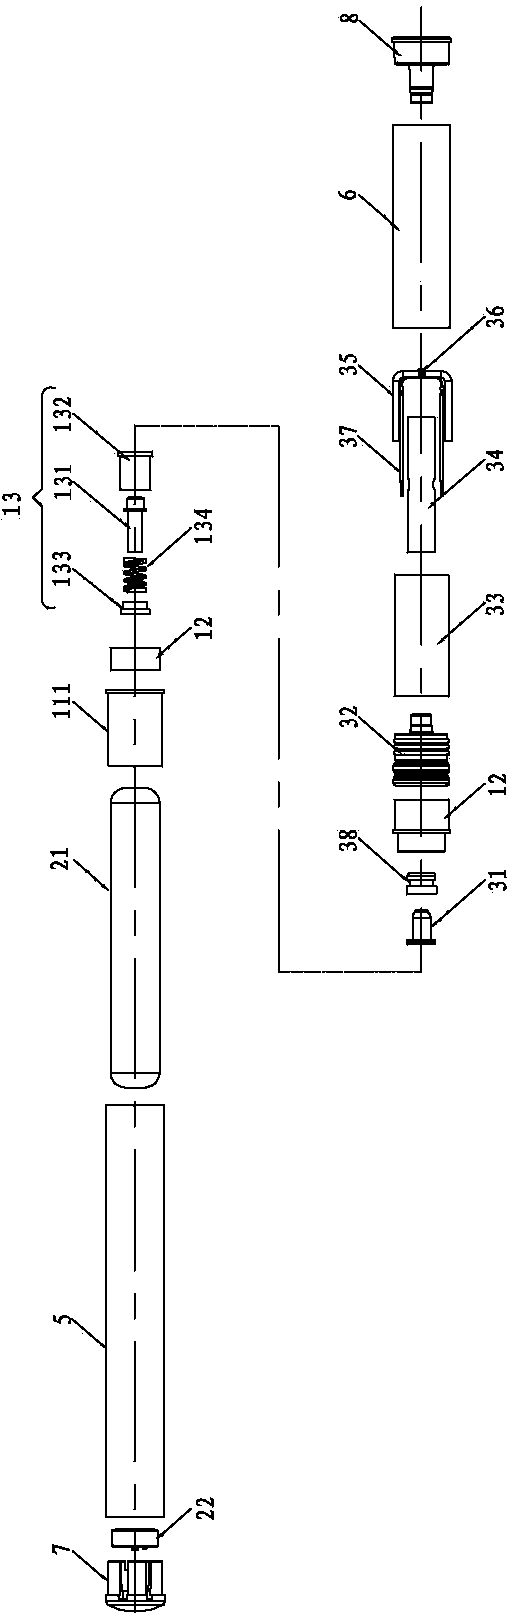 Magnetic force plug-in type electronic cigarette, manufacturing method, connecting assembly and atomization assembly